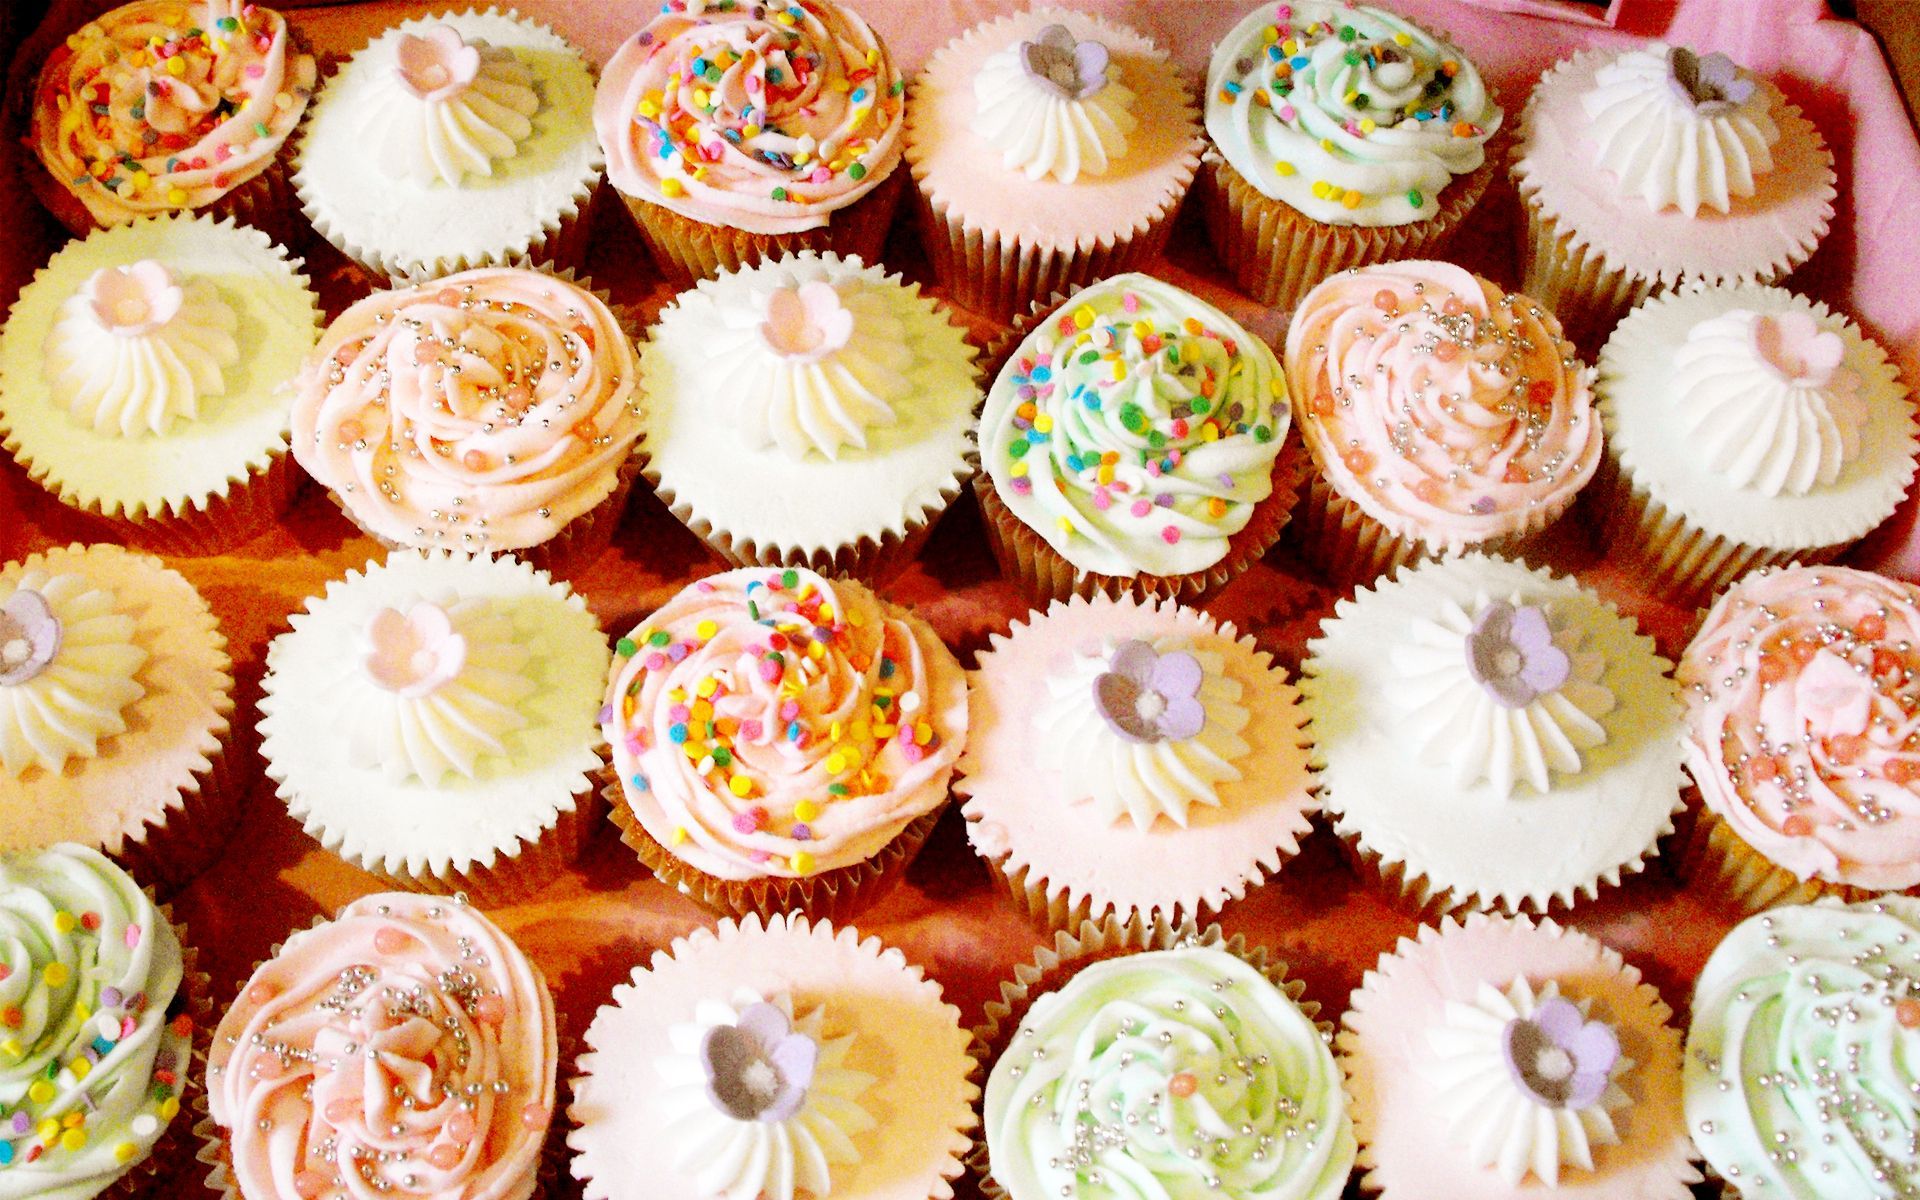 30 Cupcake Wallpapers and Desktop Backgrounds Solo Foods